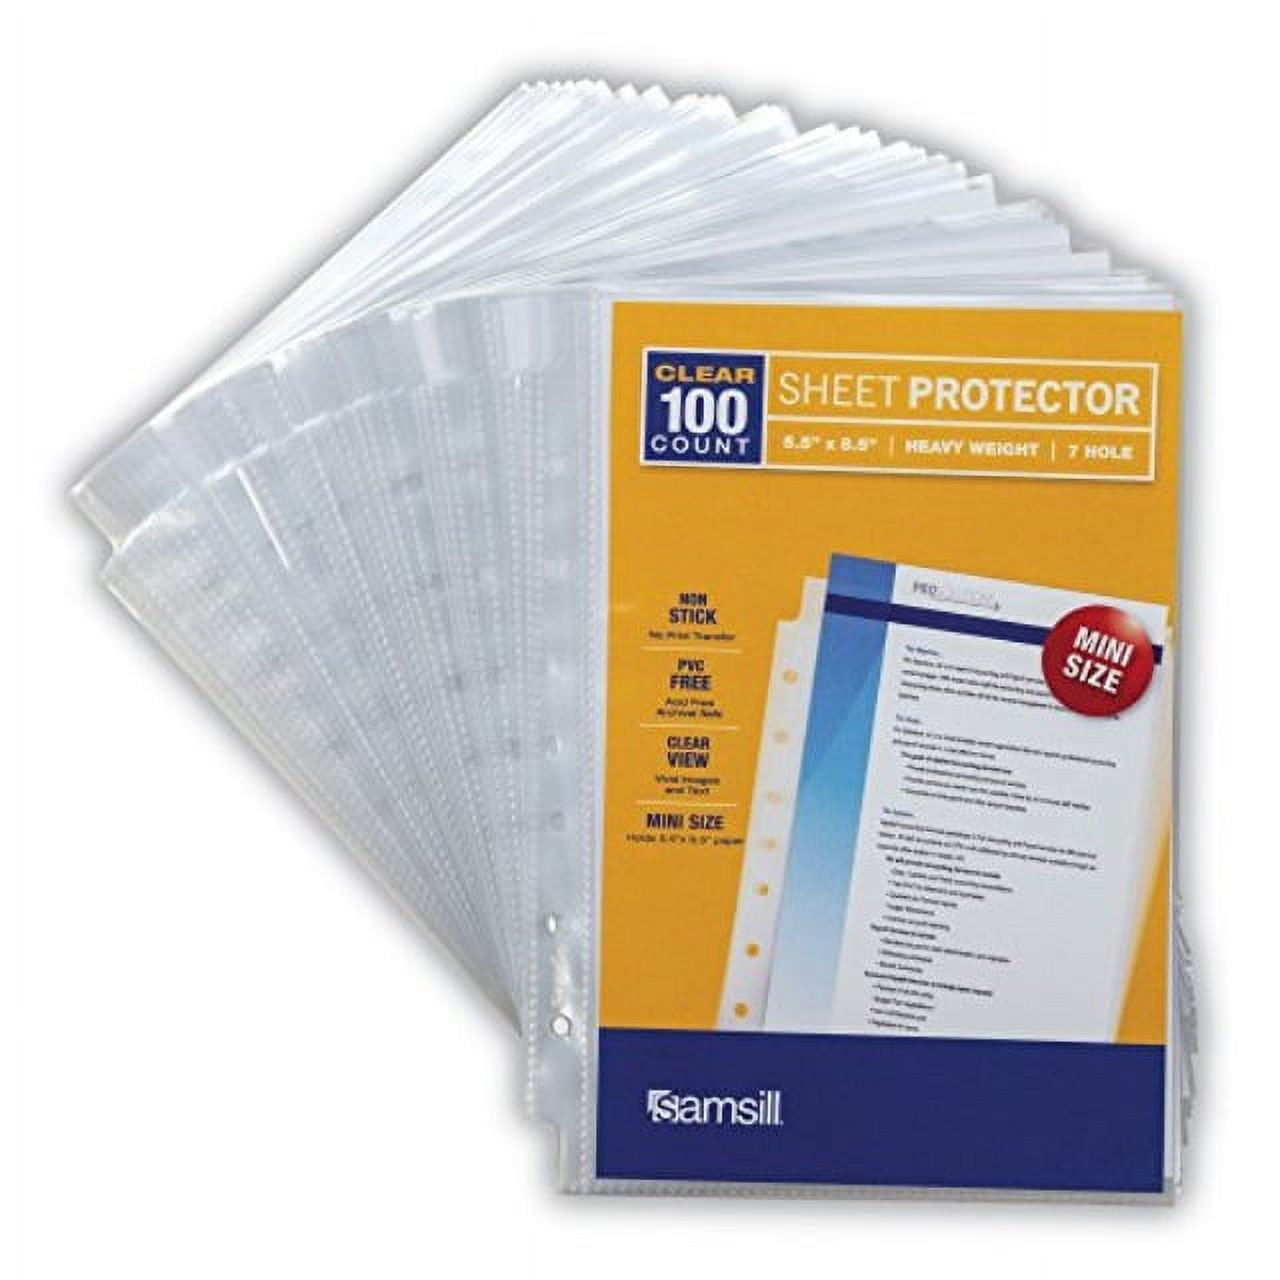 14 inch Legal Sheet Protectors with 7 Holes, 50 Pack - Keepfiling